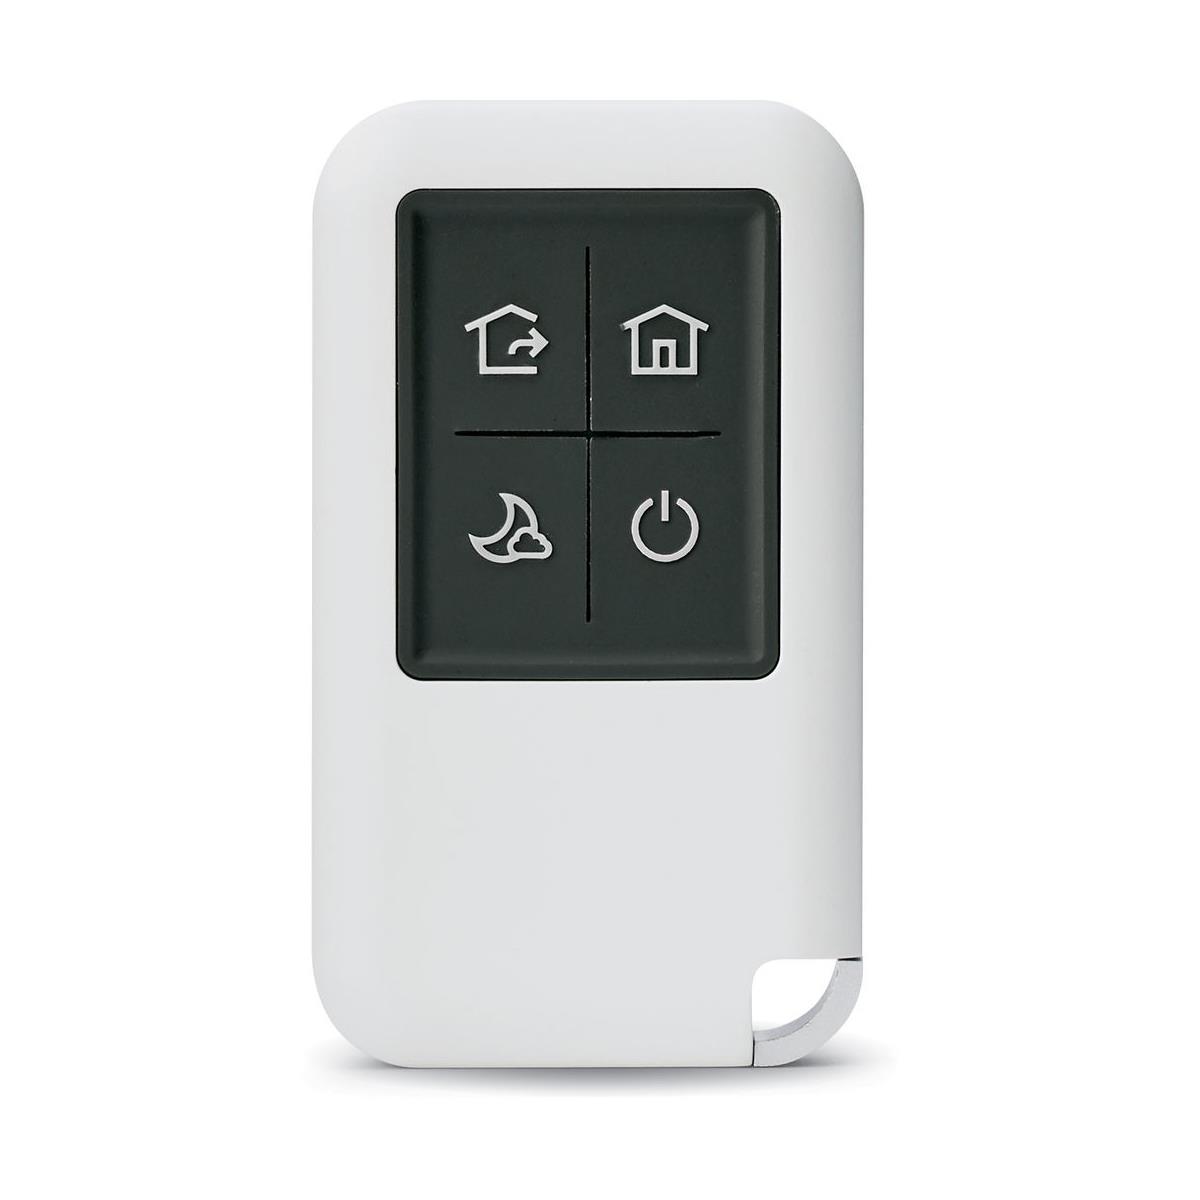 Image of Honeywell Remote Control Key Fob for Smart Home Security System